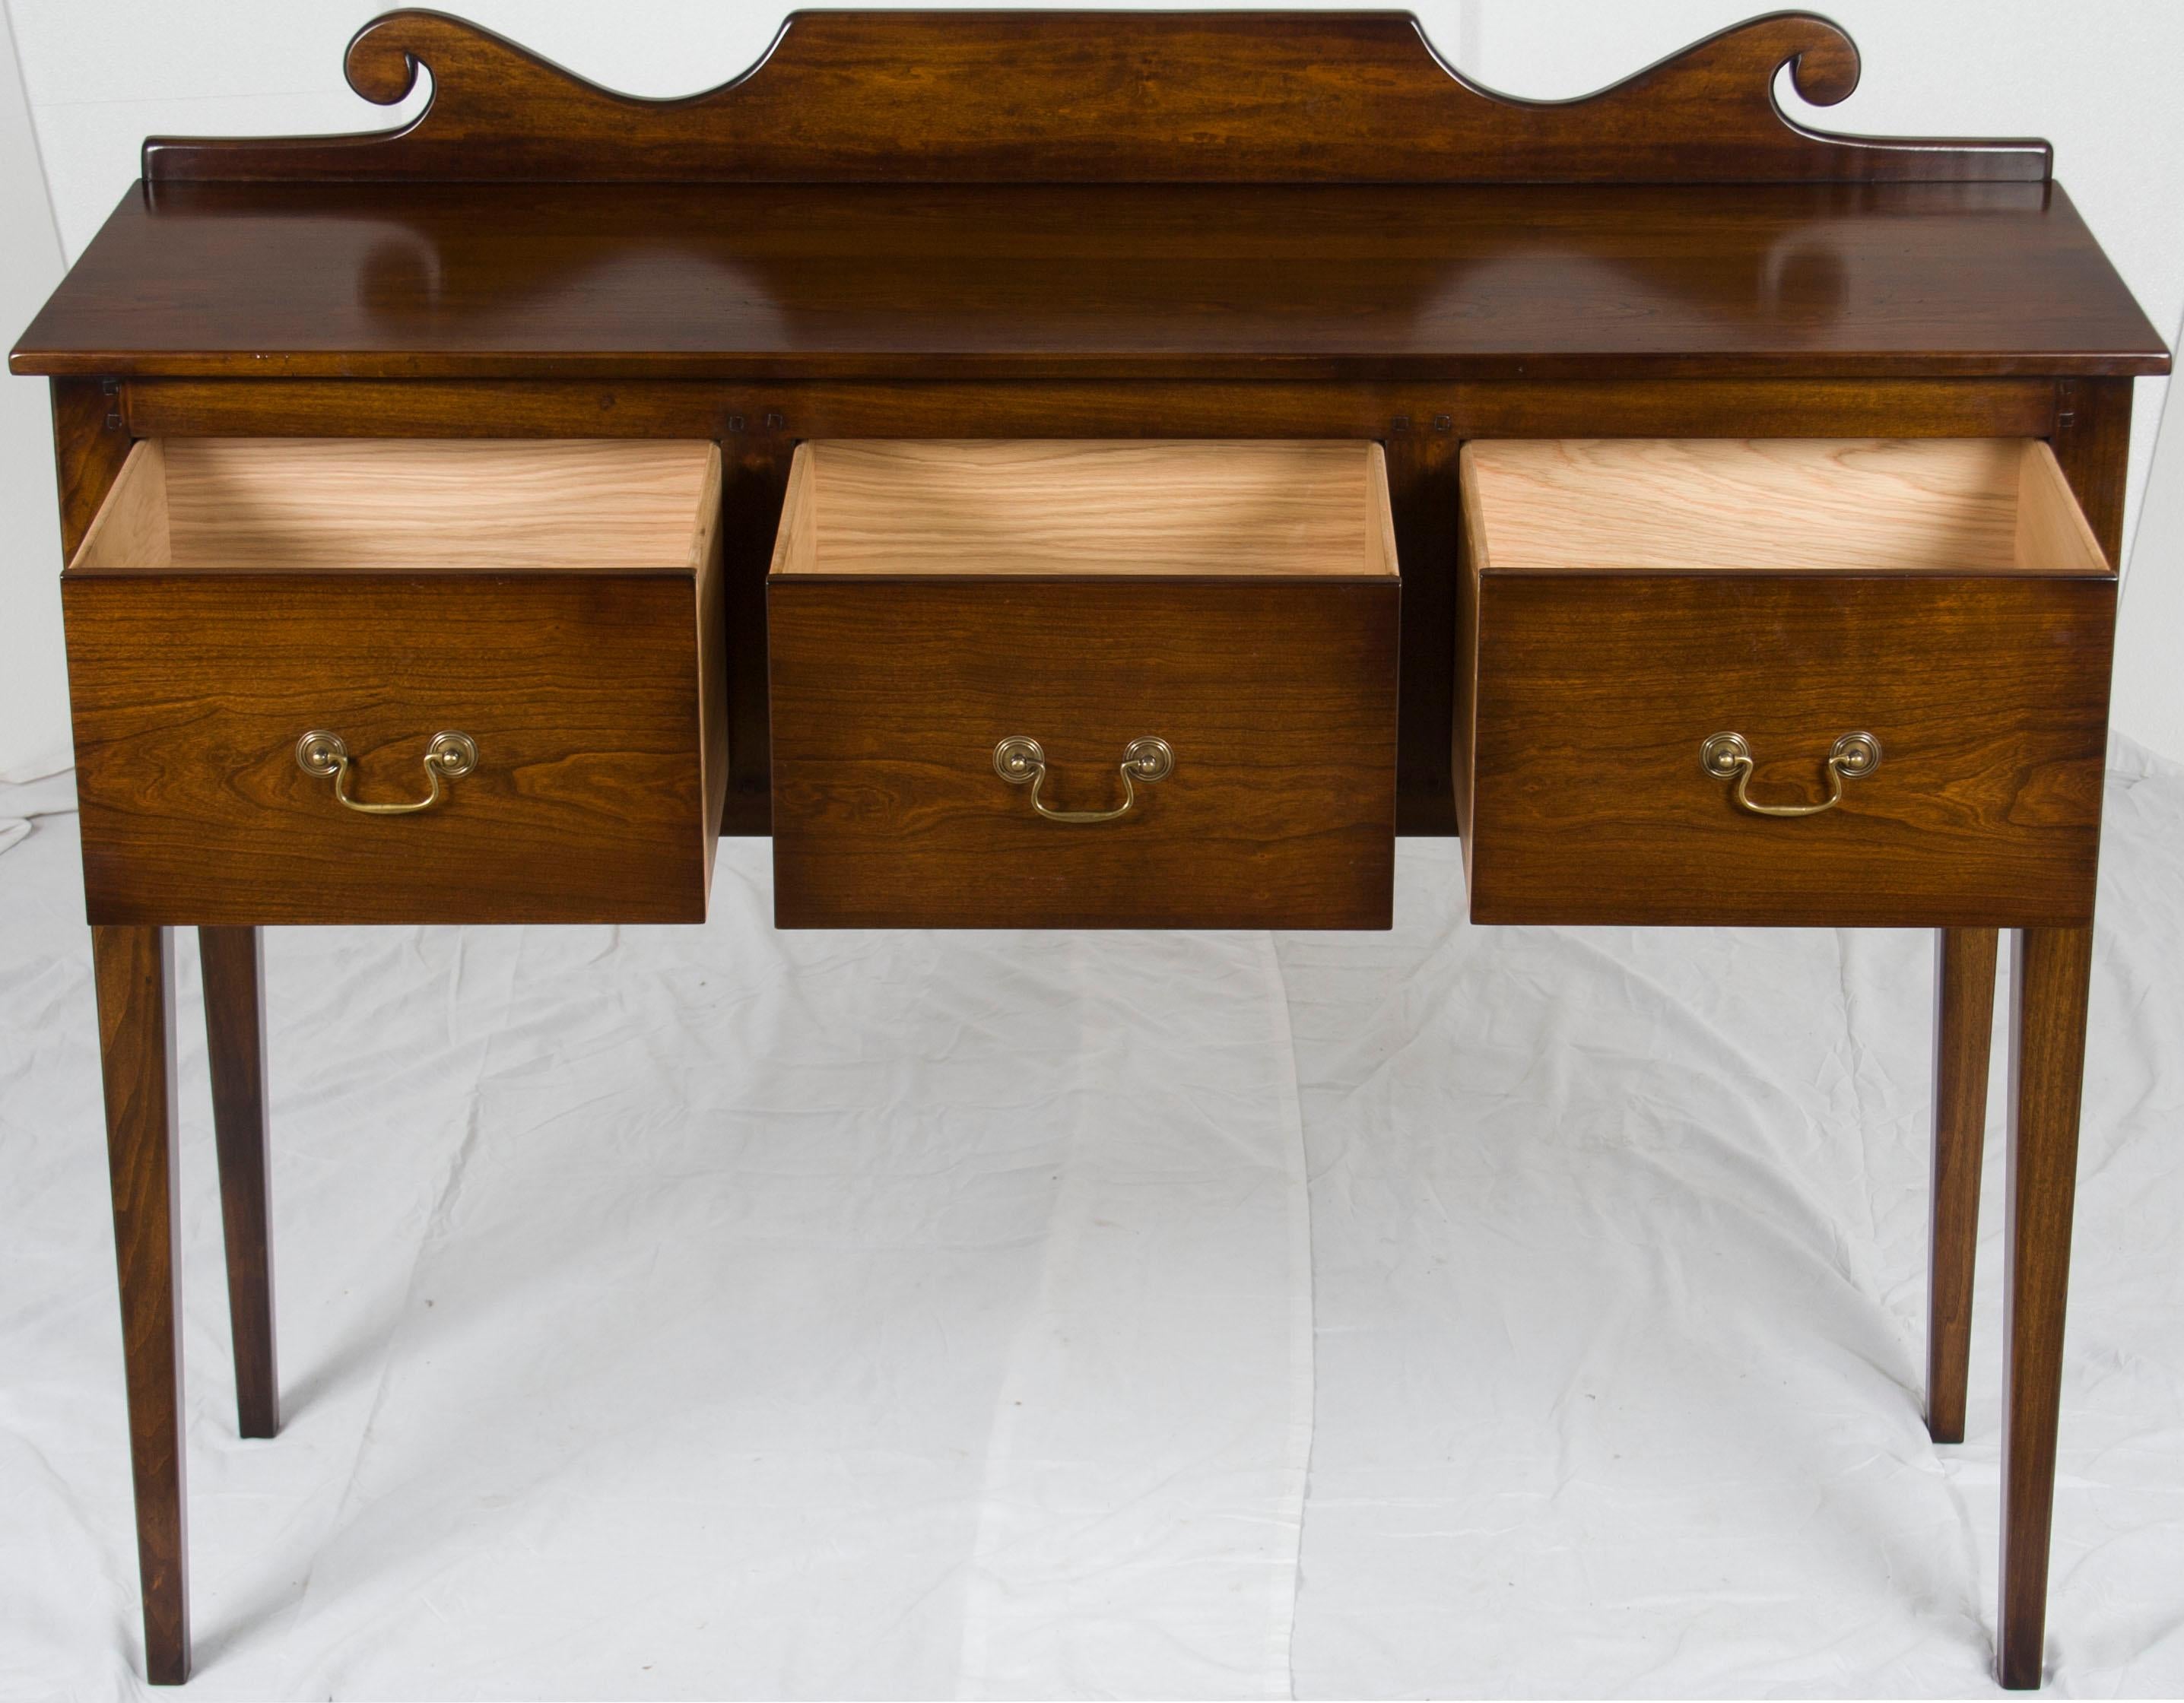 This antique country style huntboard is handmade in England using Georgian design and techniques. The solid cherry displays a rich, lustrous complexion and sweeping grain, enhanced by a long, careful process of hand-distressing, hand-finishing, and